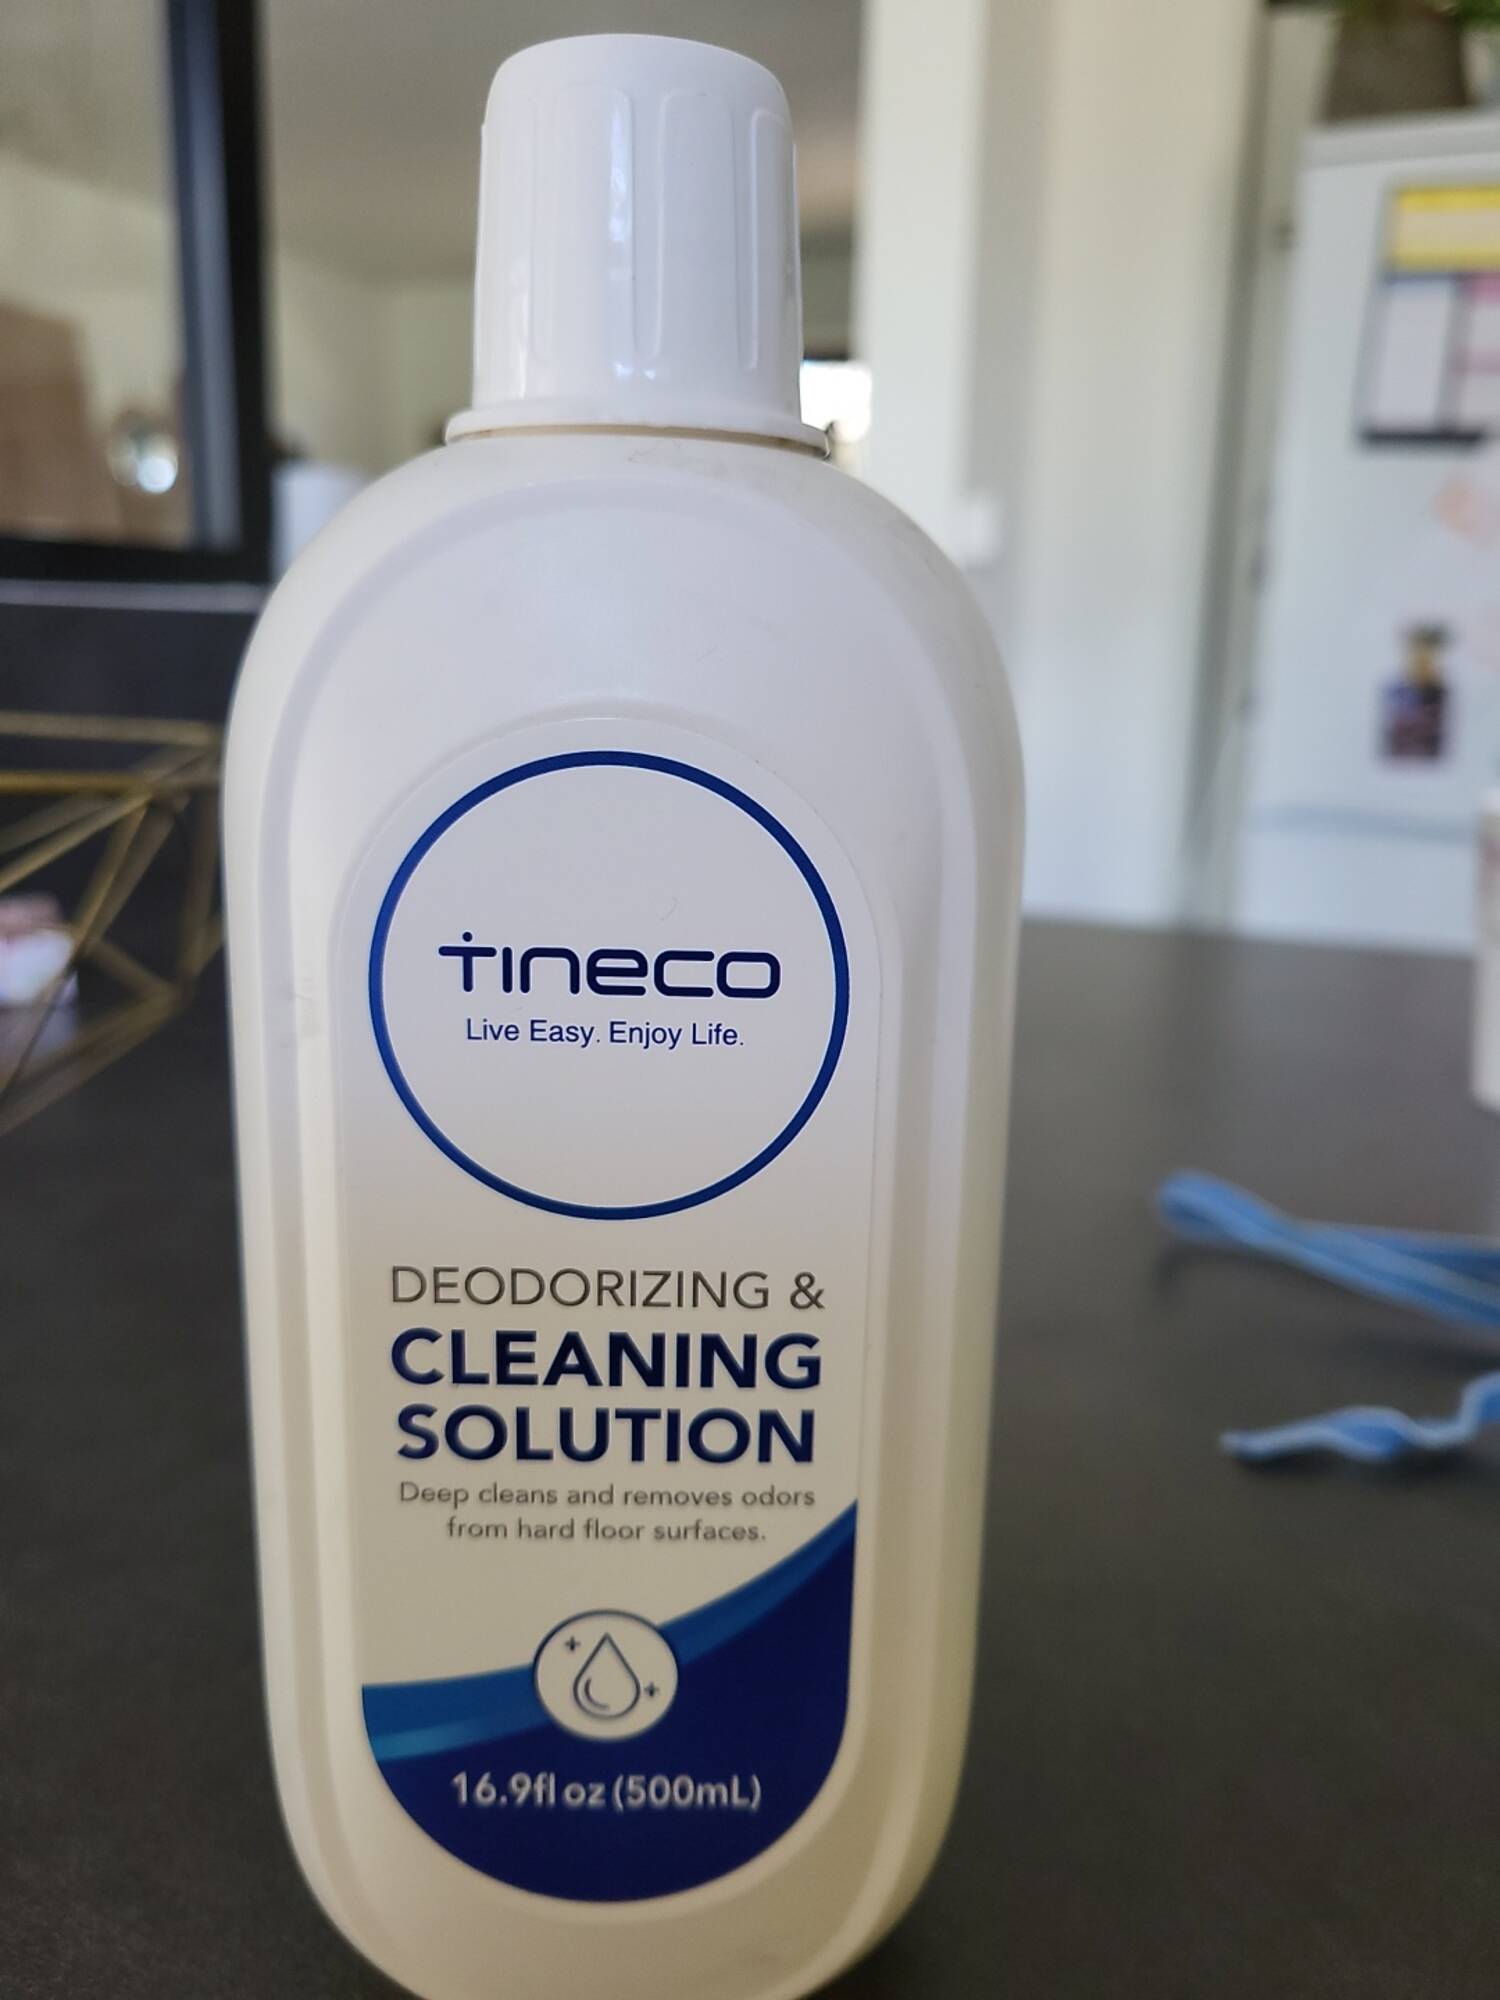 Composition TINECO Deodorizing & clearing solution - UFC-Que Choisir